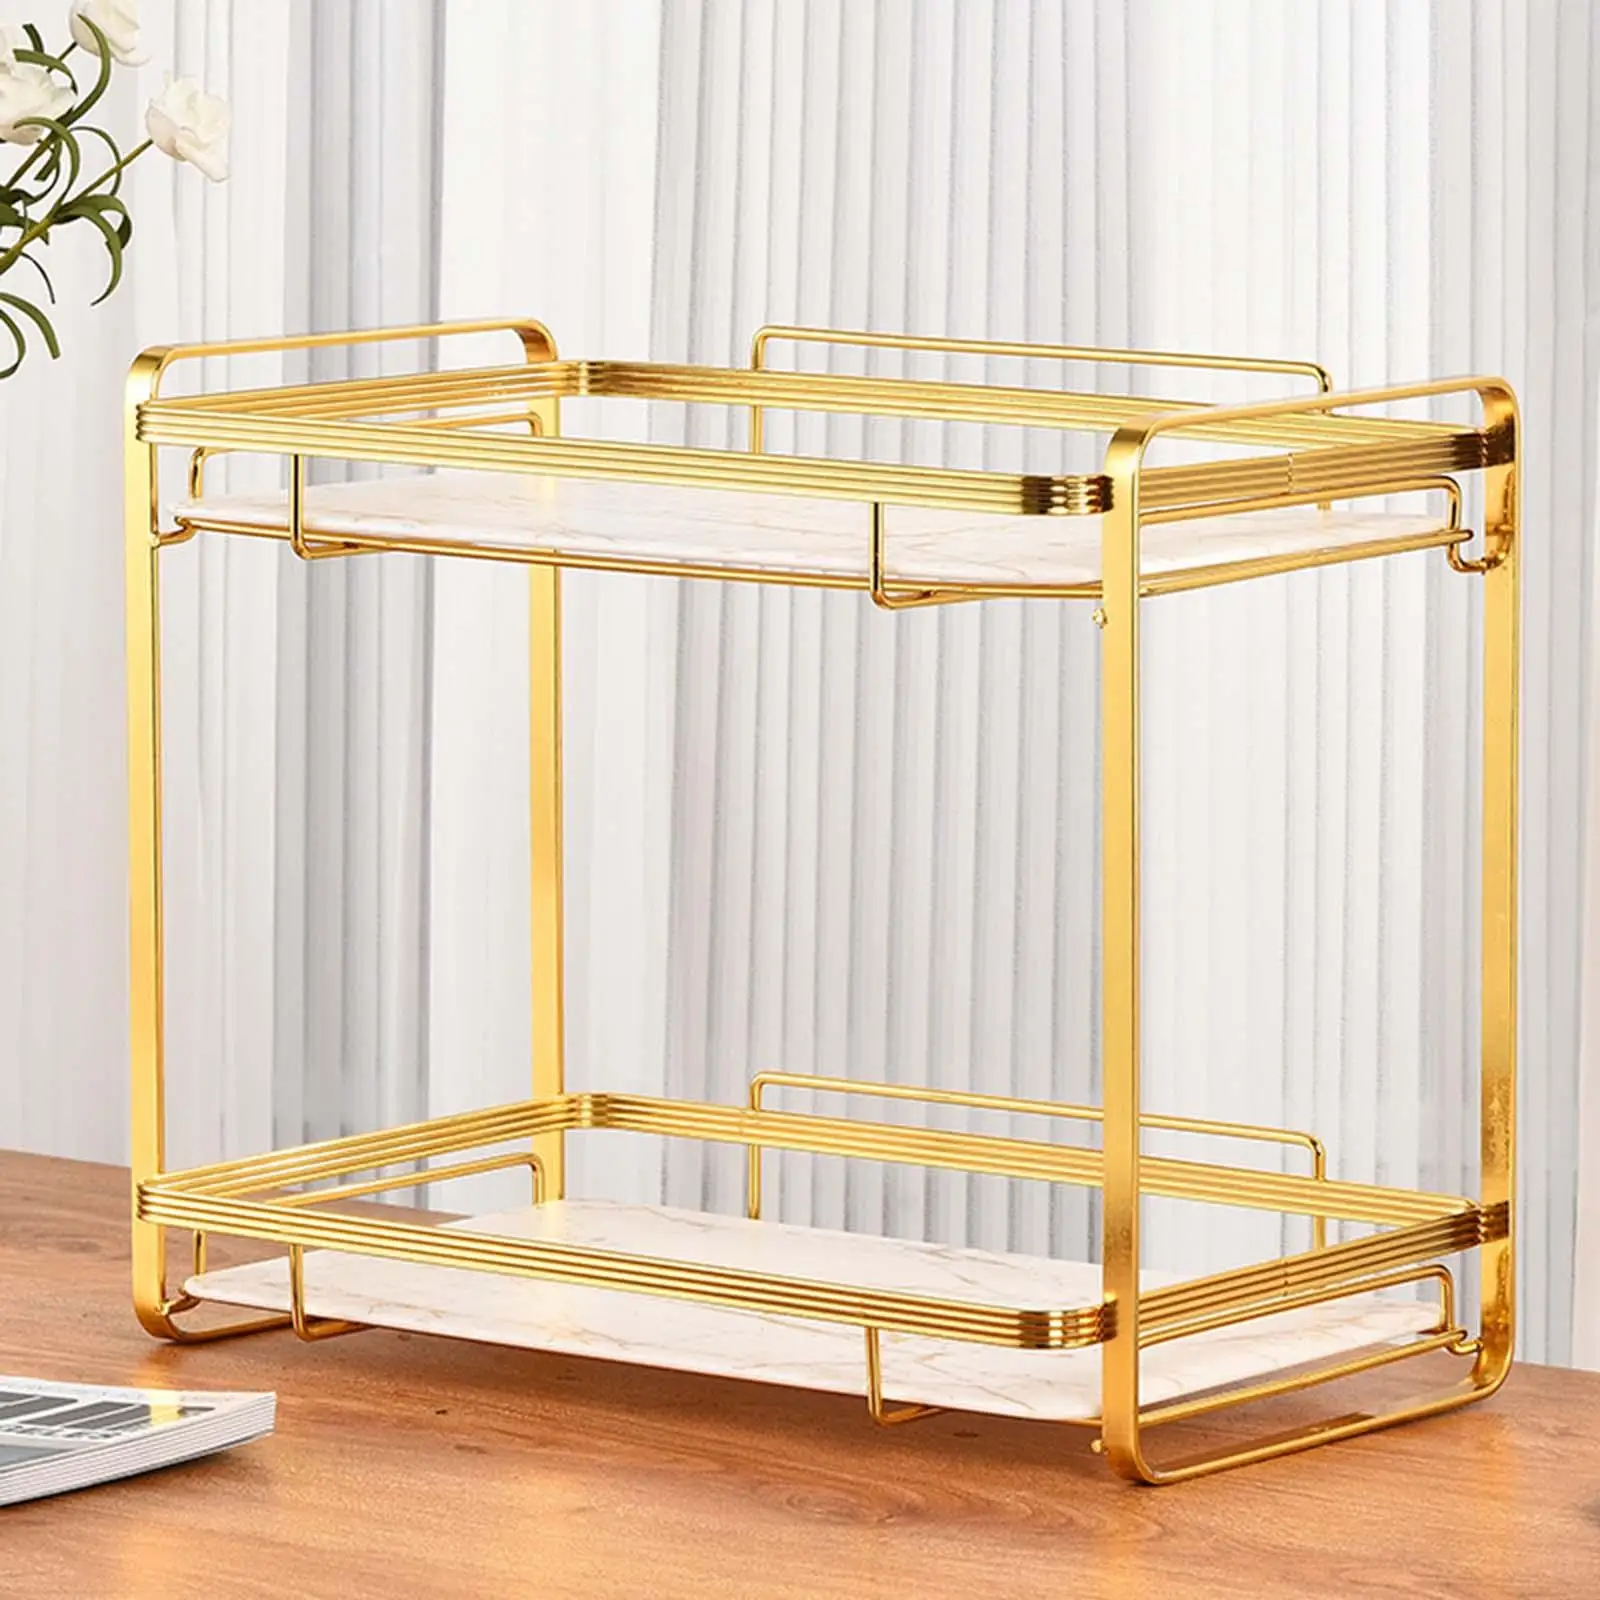 Makeup Organizer Shelf Standing Rack with Removable Tray for Bedroom Dresser Decor